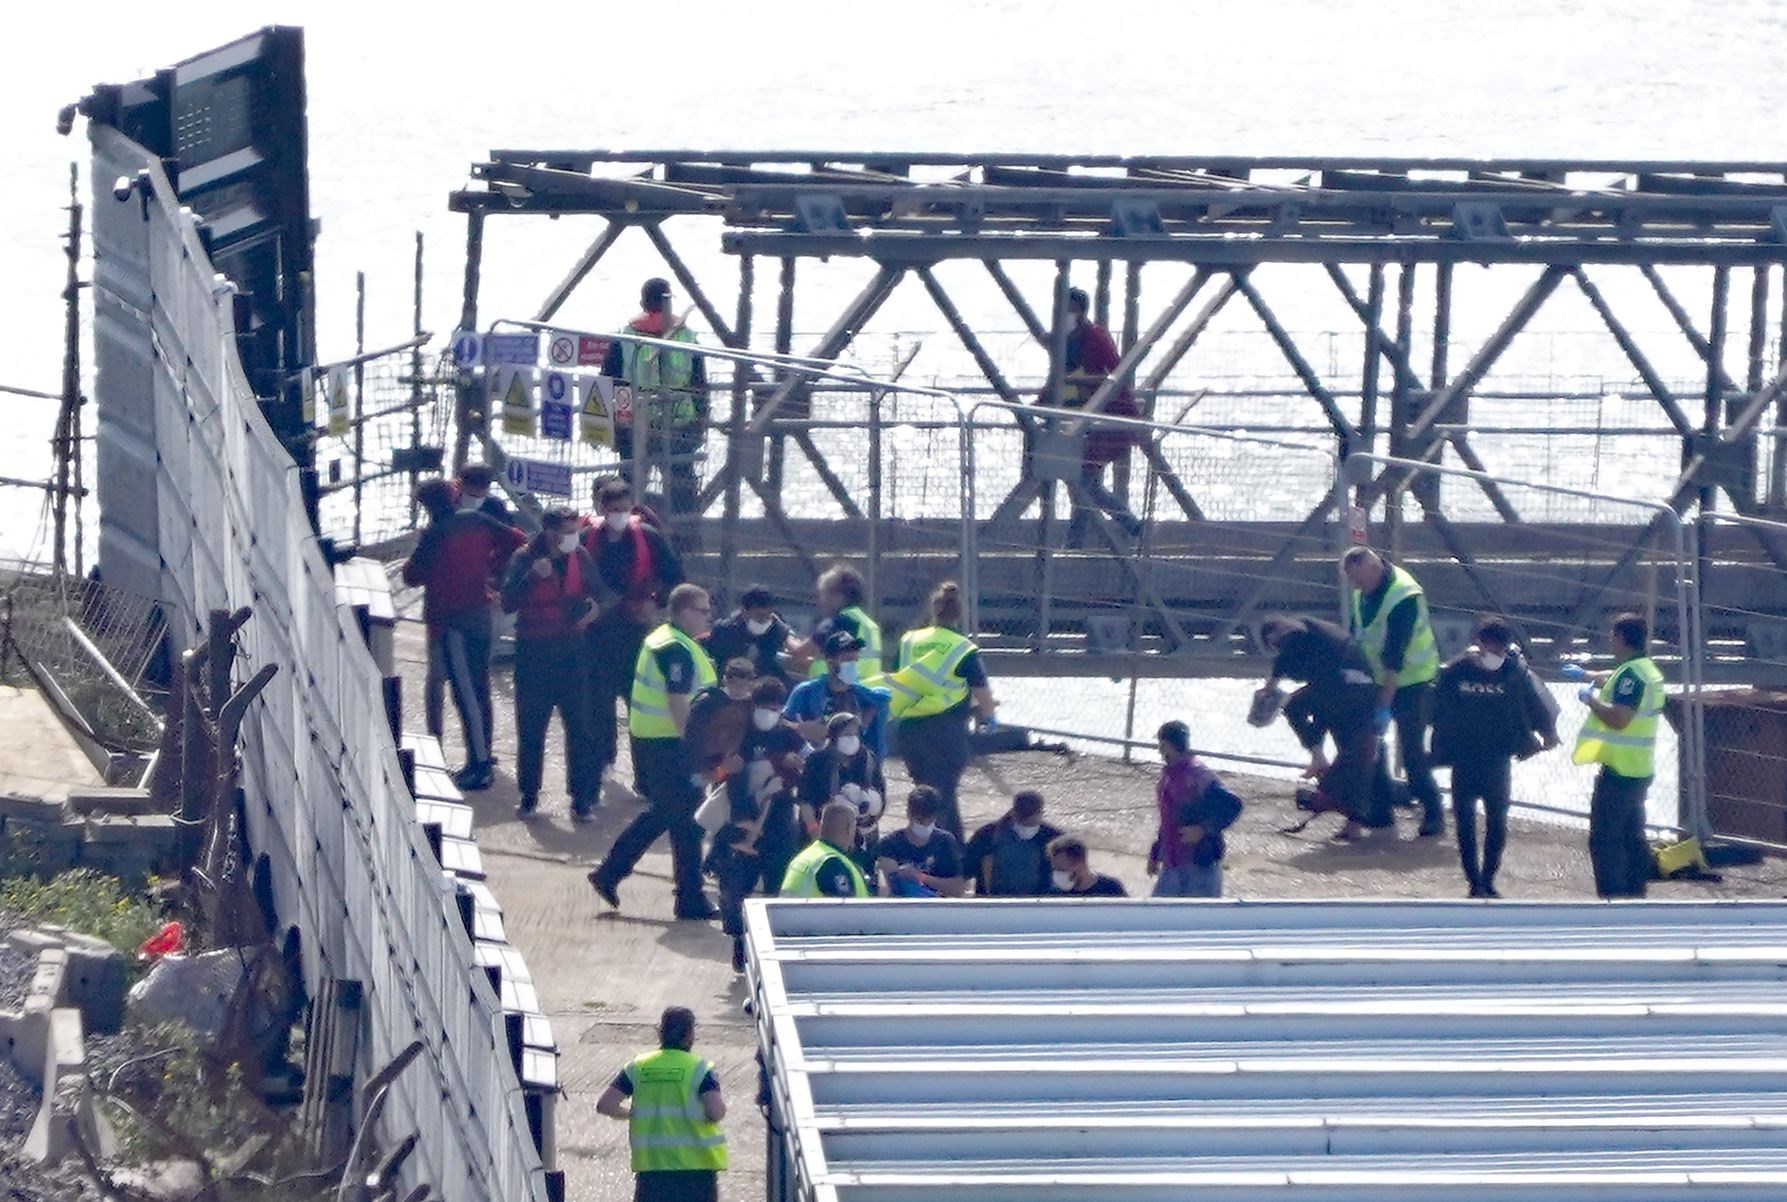 A group of people thought to be migrants are brought in to Dover on Monday (Gareth Fuller/PA)